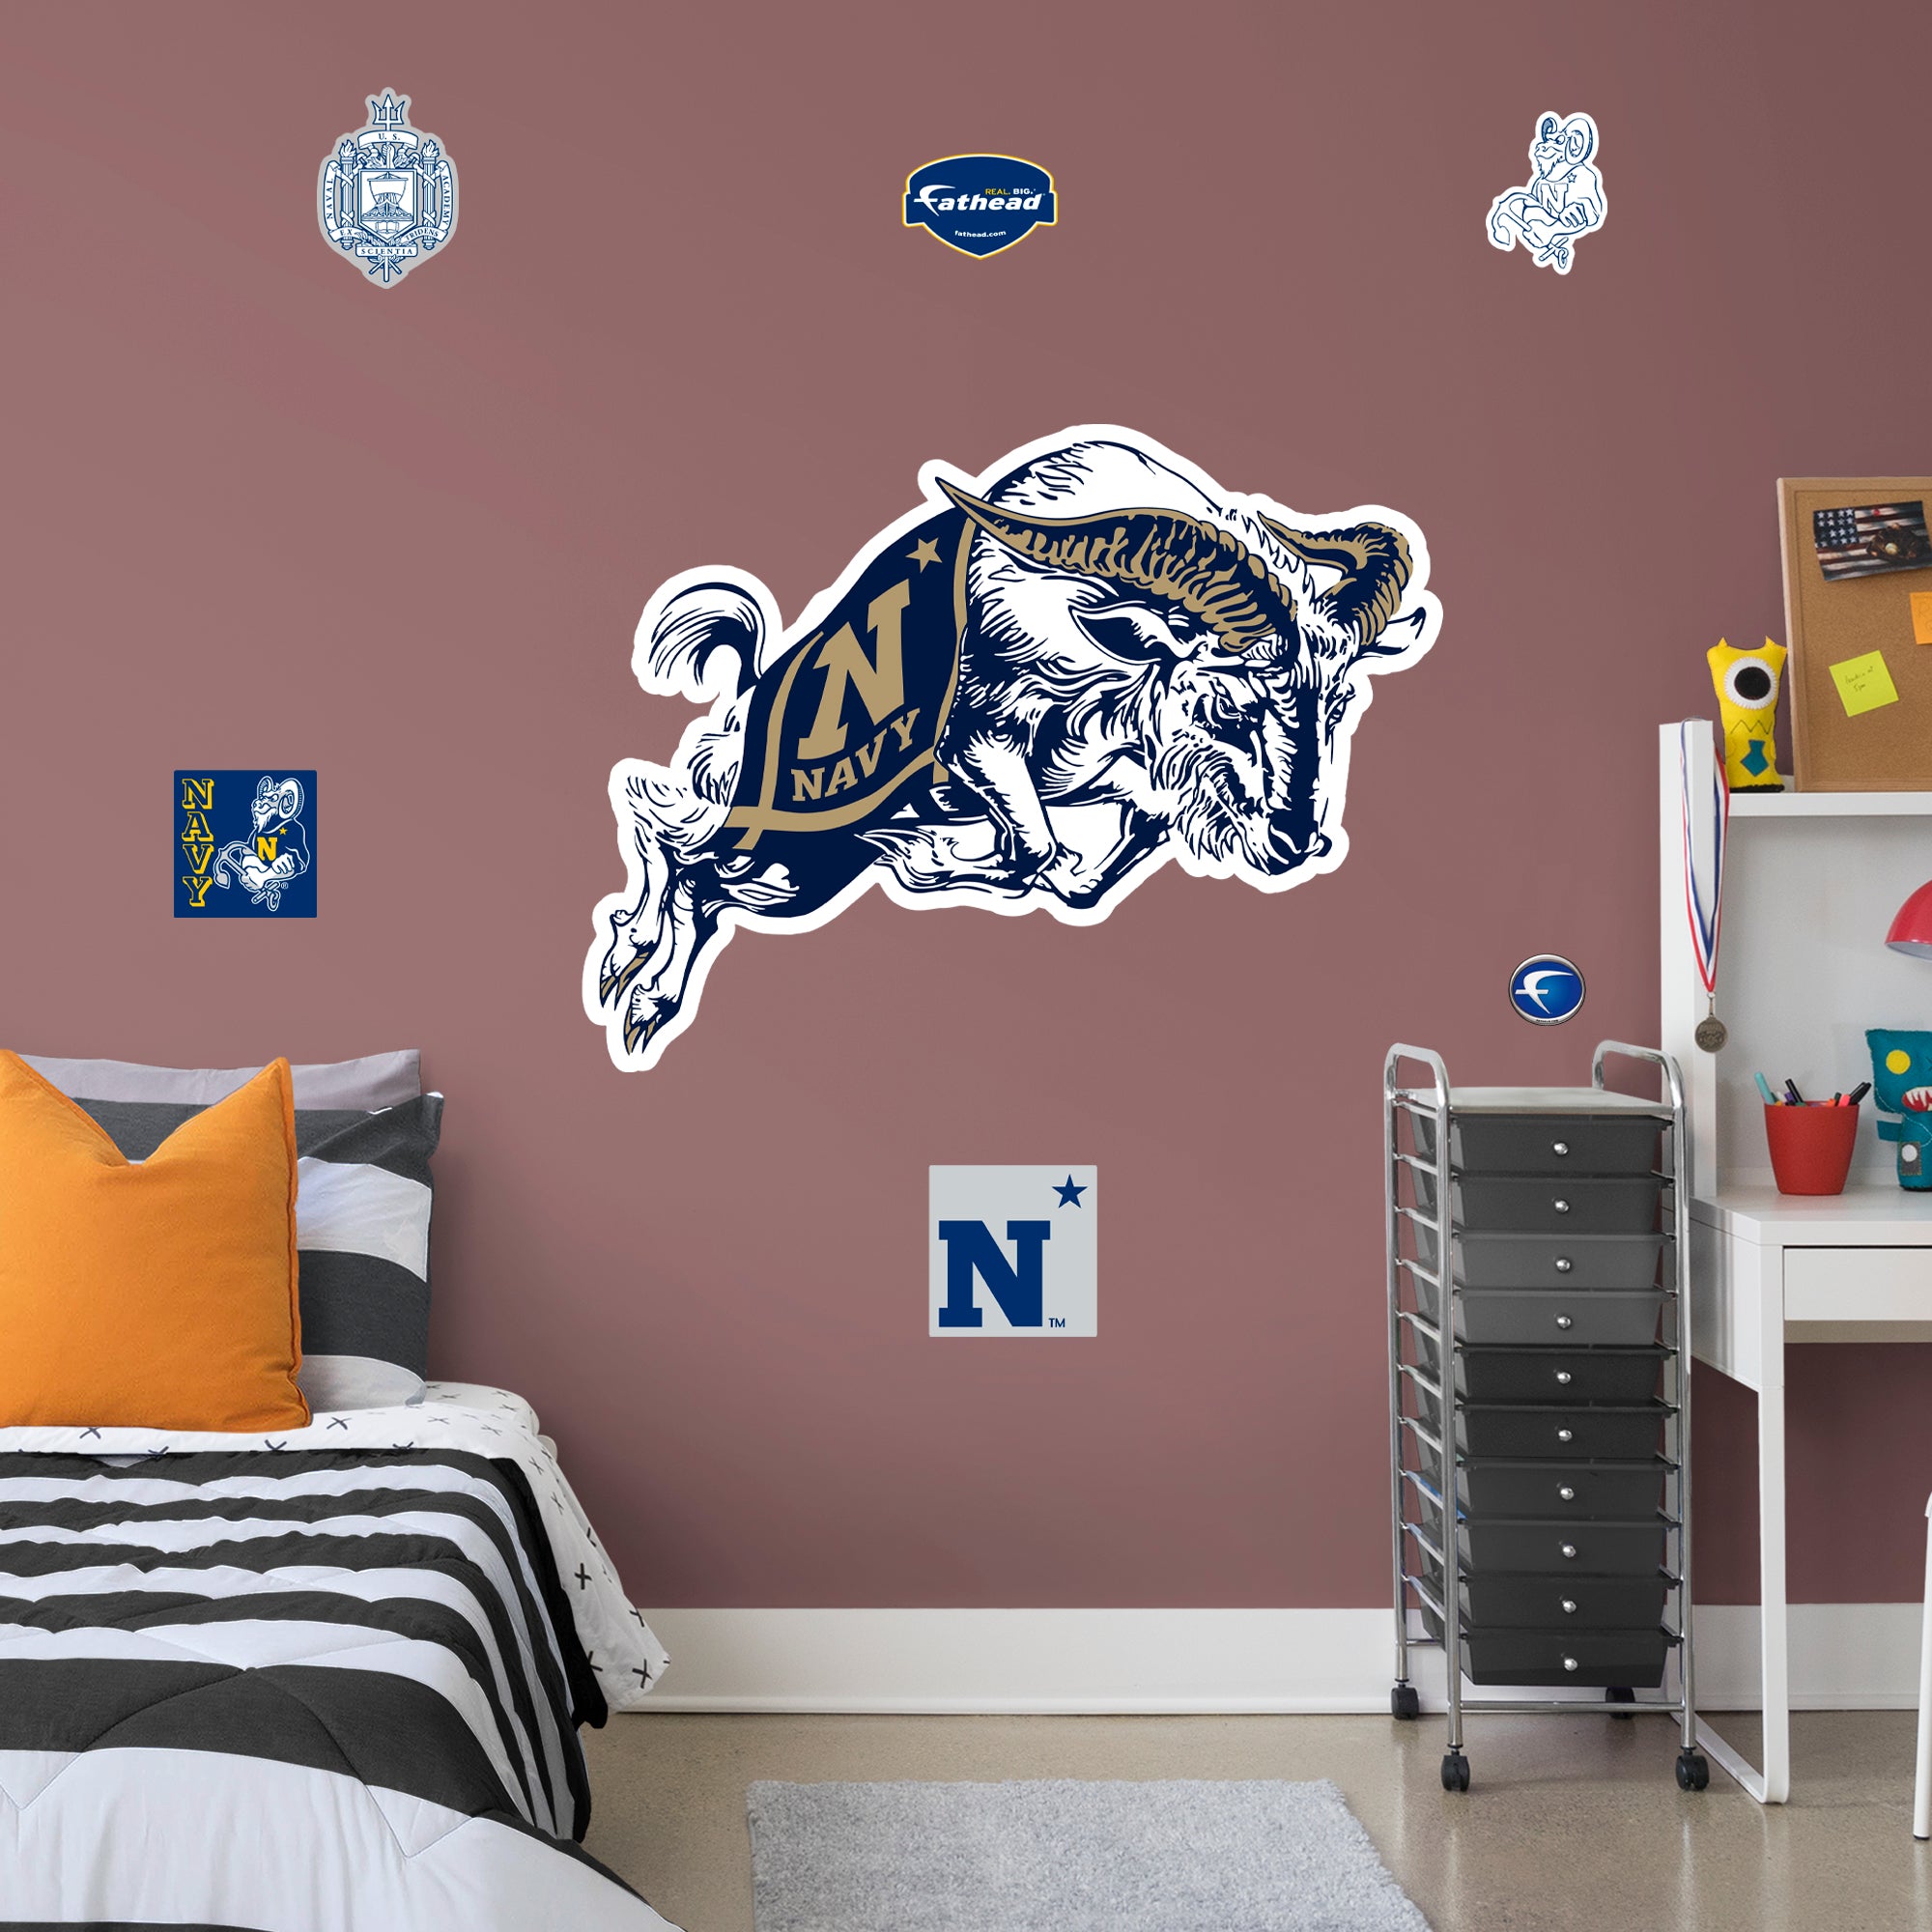 U.S. Naval Academy 2020 RealBig Logo - Officially Licensed NCAA Removable Wall Decal Giant Decal (48"W x 39"H) by Fathead | Viny